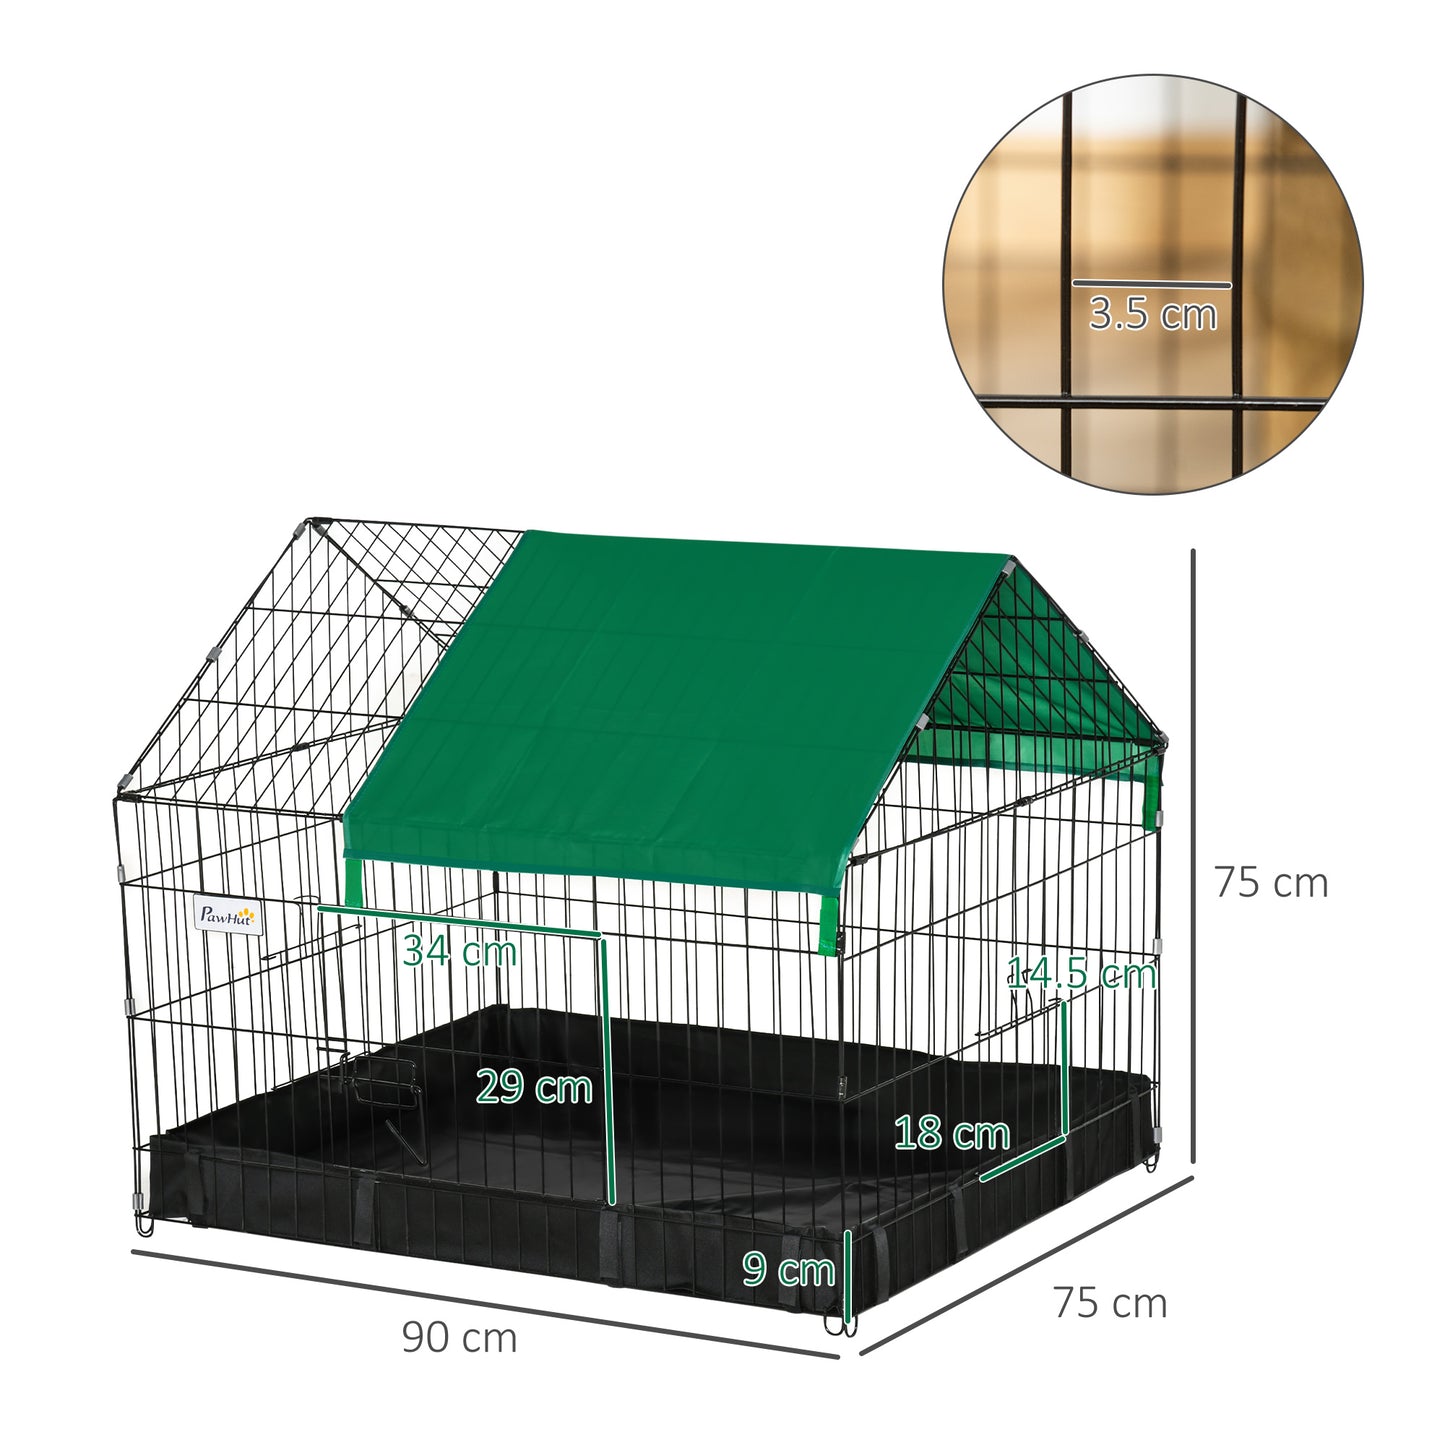 PawHut Guinea Pig Cage, Small Animal Habitat, Rabbit House w/ No Leaking Bottom, Safety Locking System, Top Roof